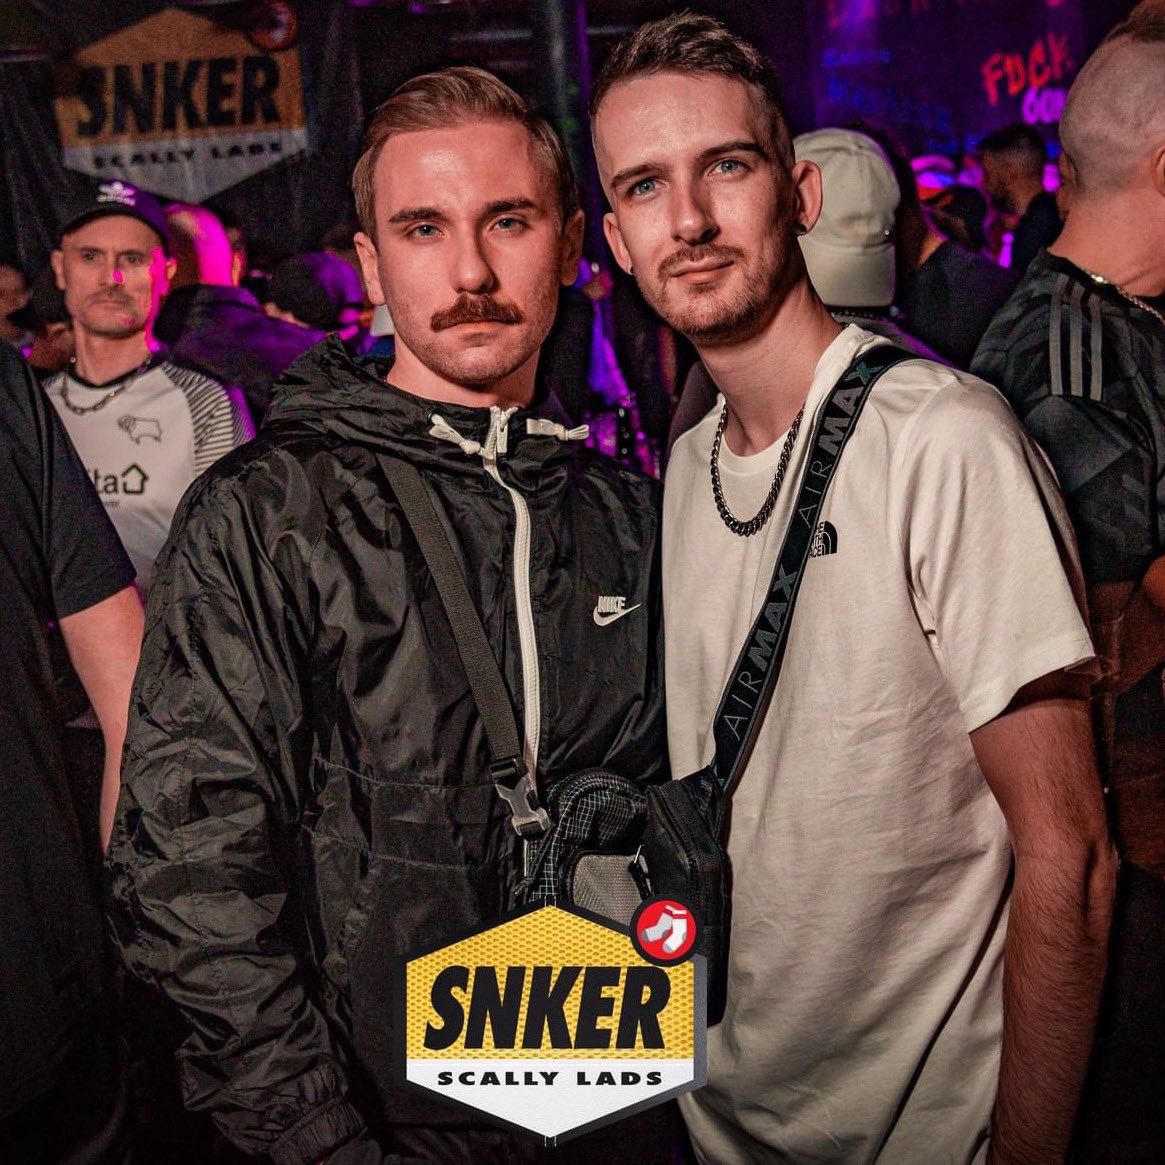 Calling all Sneakerheads and Scally Lads! It’s @SNKER_mcr 2nd birthday this Friday. Get them tracksuits and trainers ready! Advance Tickets are available online or limited tickets available on the door!